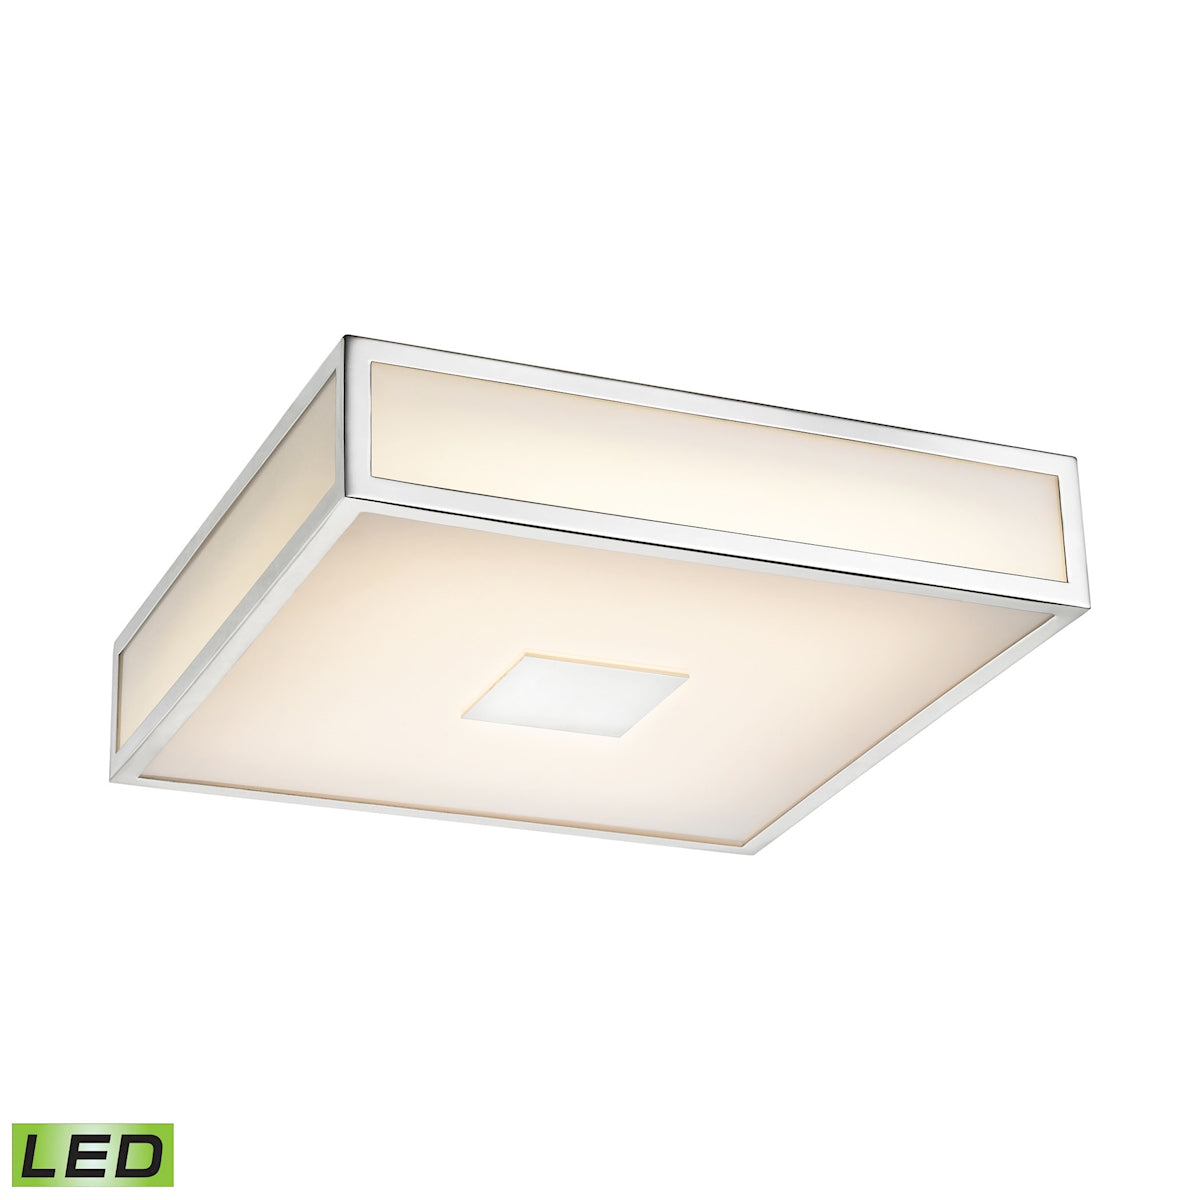 ELK Lighting FML4000-10-15 Hampstead 1-Light Flush Mount in Chrome with Opal White Acrylic Diffuser - Integrated LED